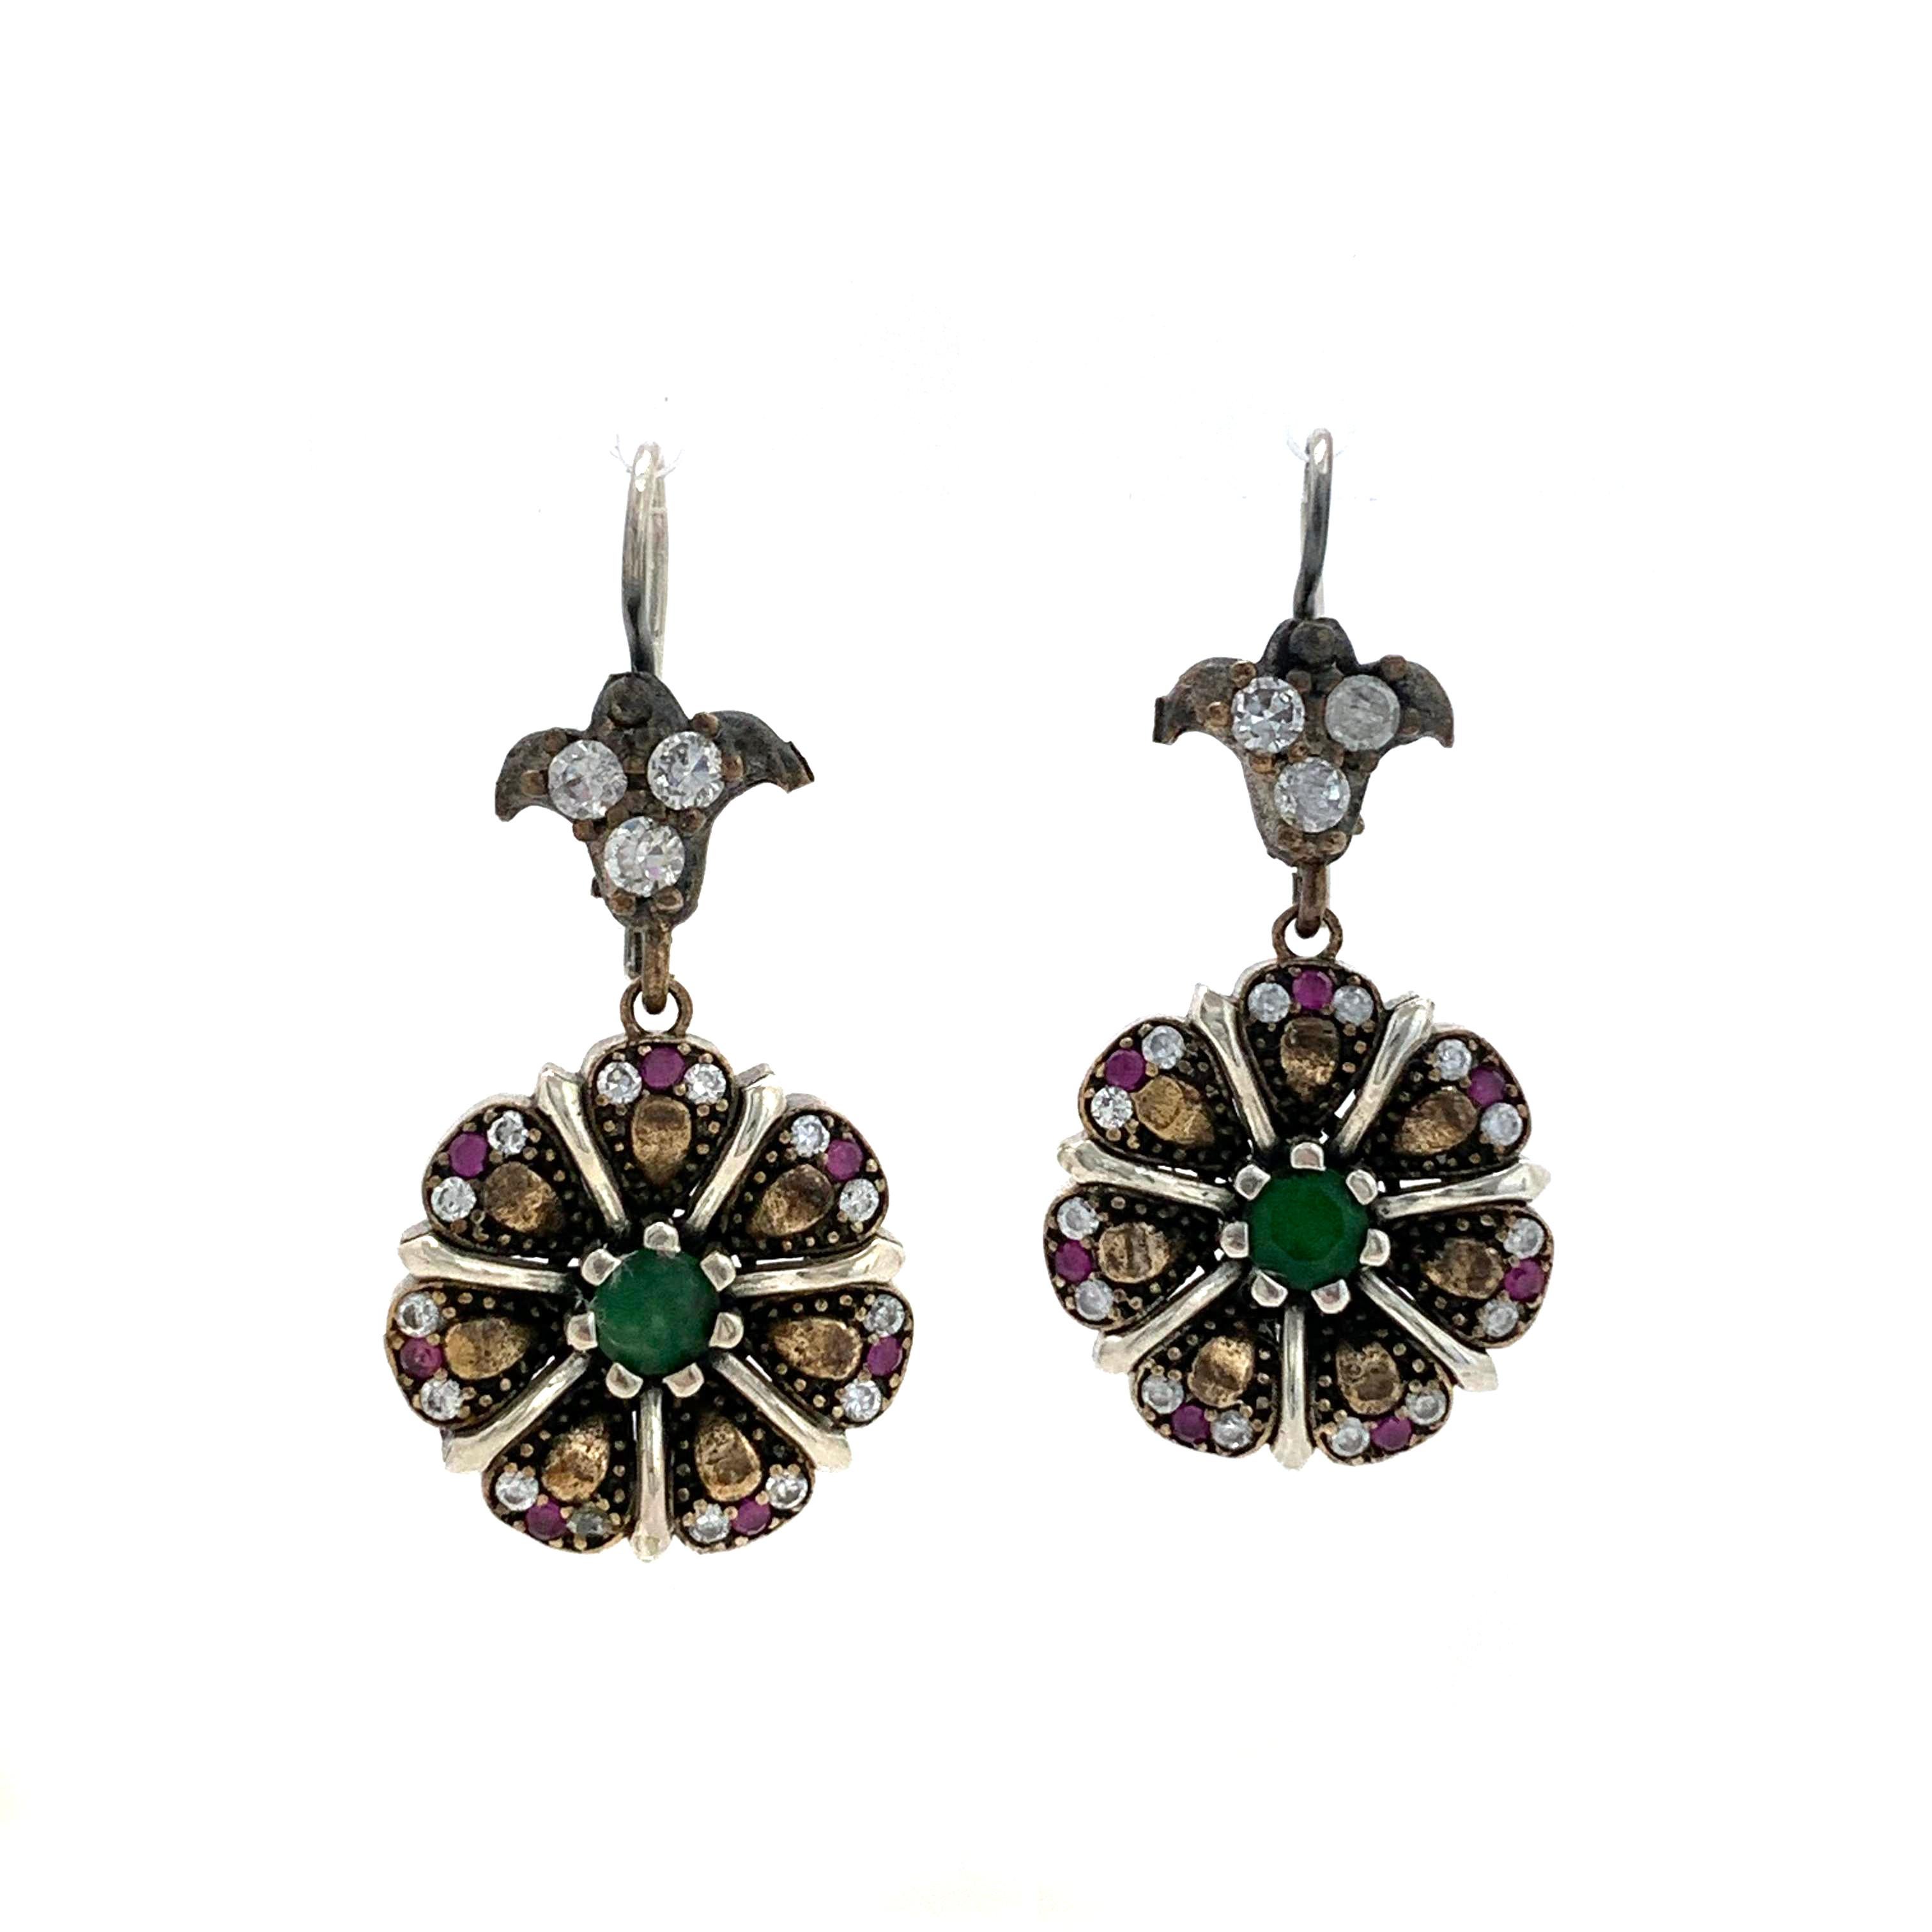 Antique Style Sterling Silver Emerald Ruby and CZ Flower Drop Earrings. The earrings features mixture of round emerald, rubies and cubic zirconia adorned in antique style - vintage gunmetal and rose gold plated over sterling silver. Handmade ear